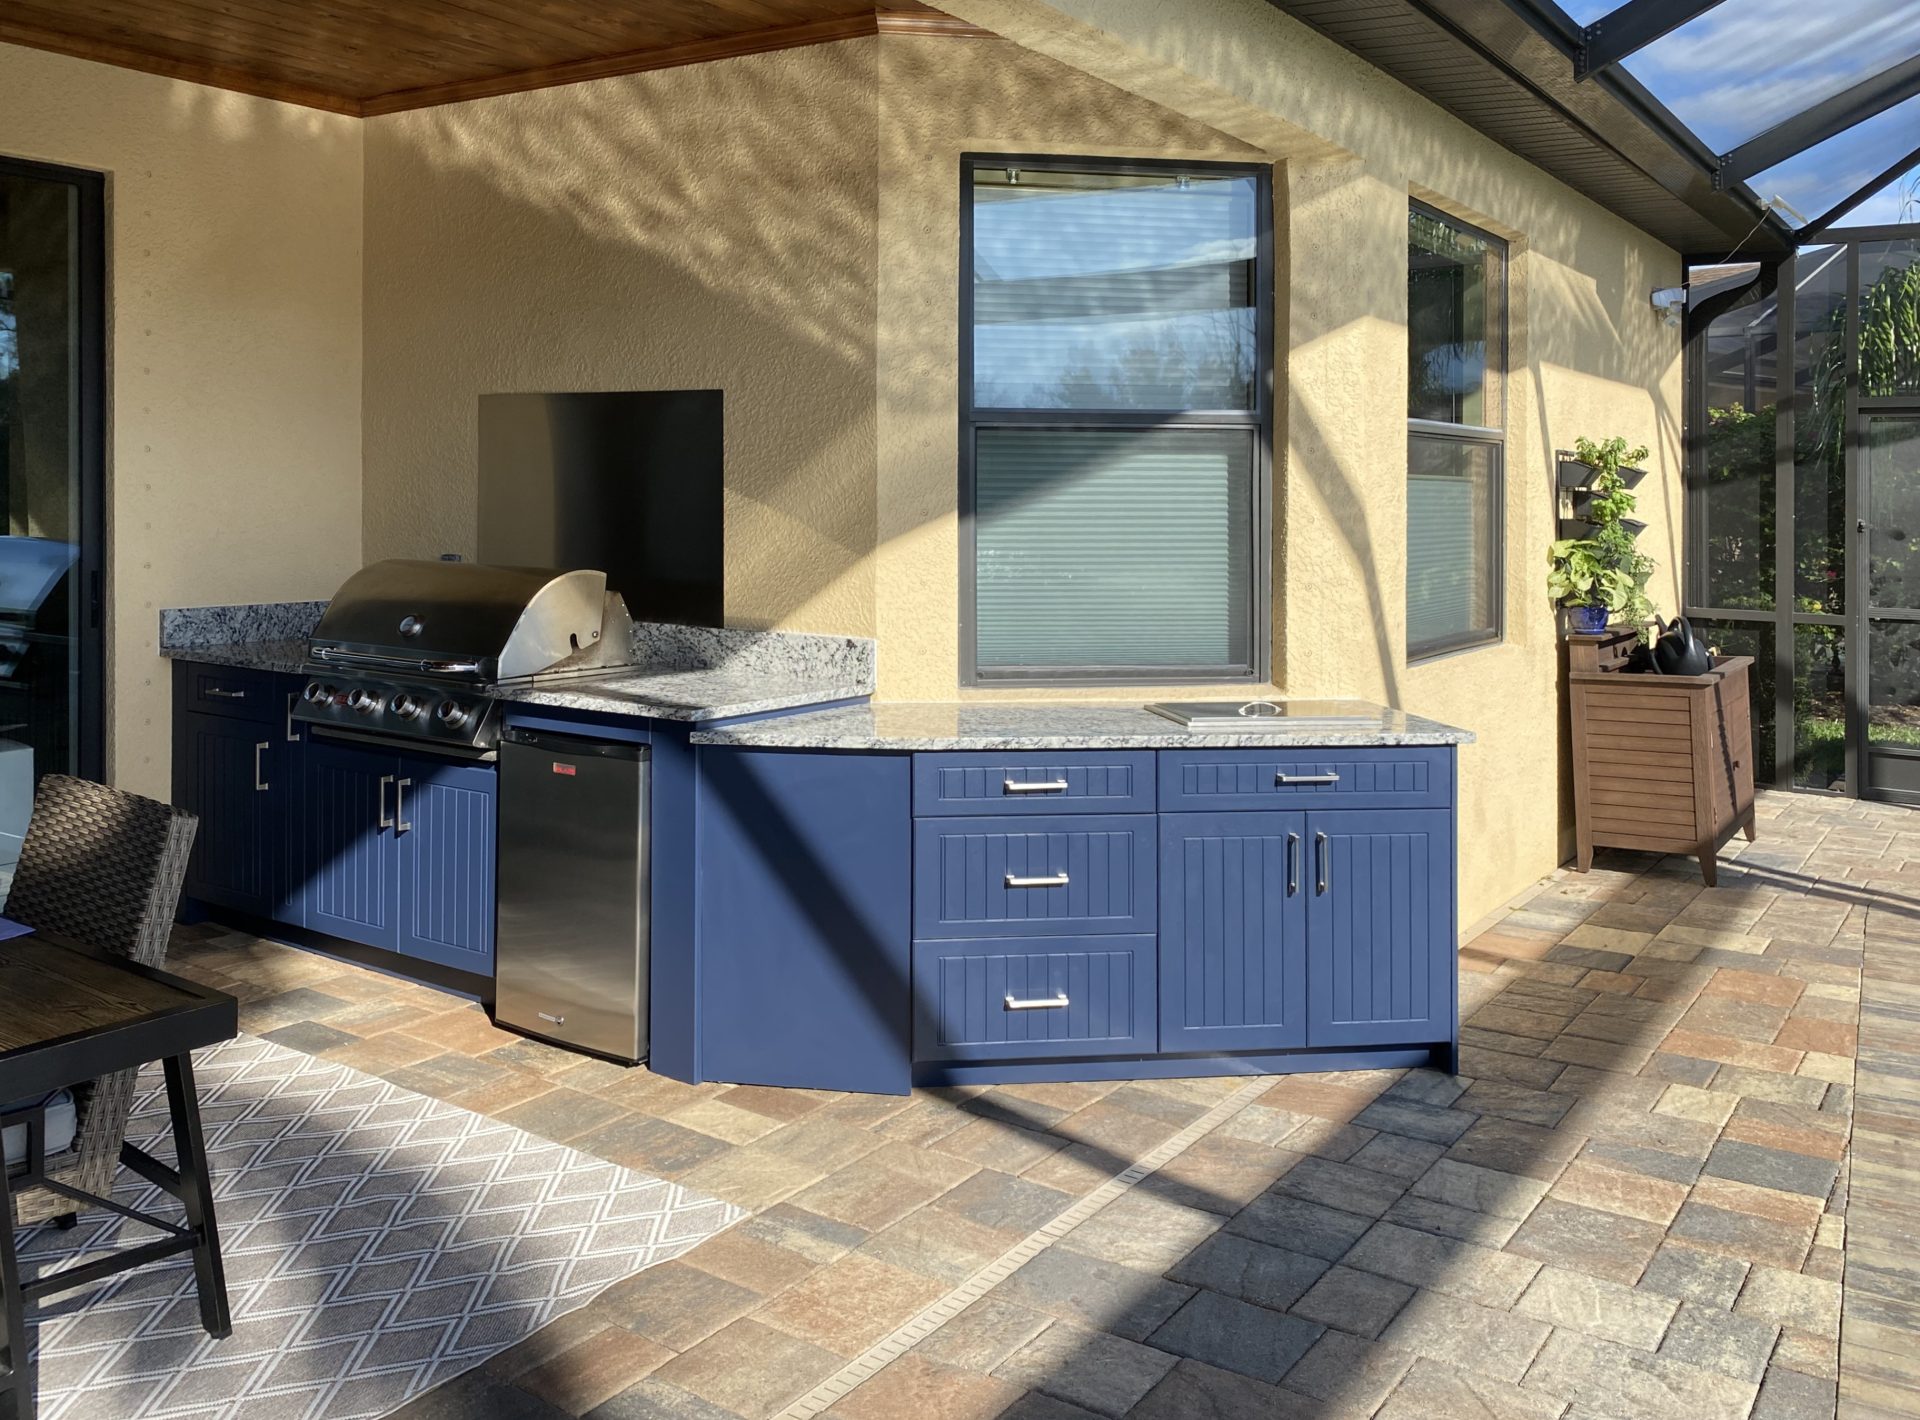 OUTDOOR KITCHEN 38. Custom outdoor kitchen in Lakewood Ranch, FL. Kitchen features indigo blue, v-groove style cabinets. Appliances include Lion grill, Blaze stainless front refrigerator and stainless backsplash & bar pulls.